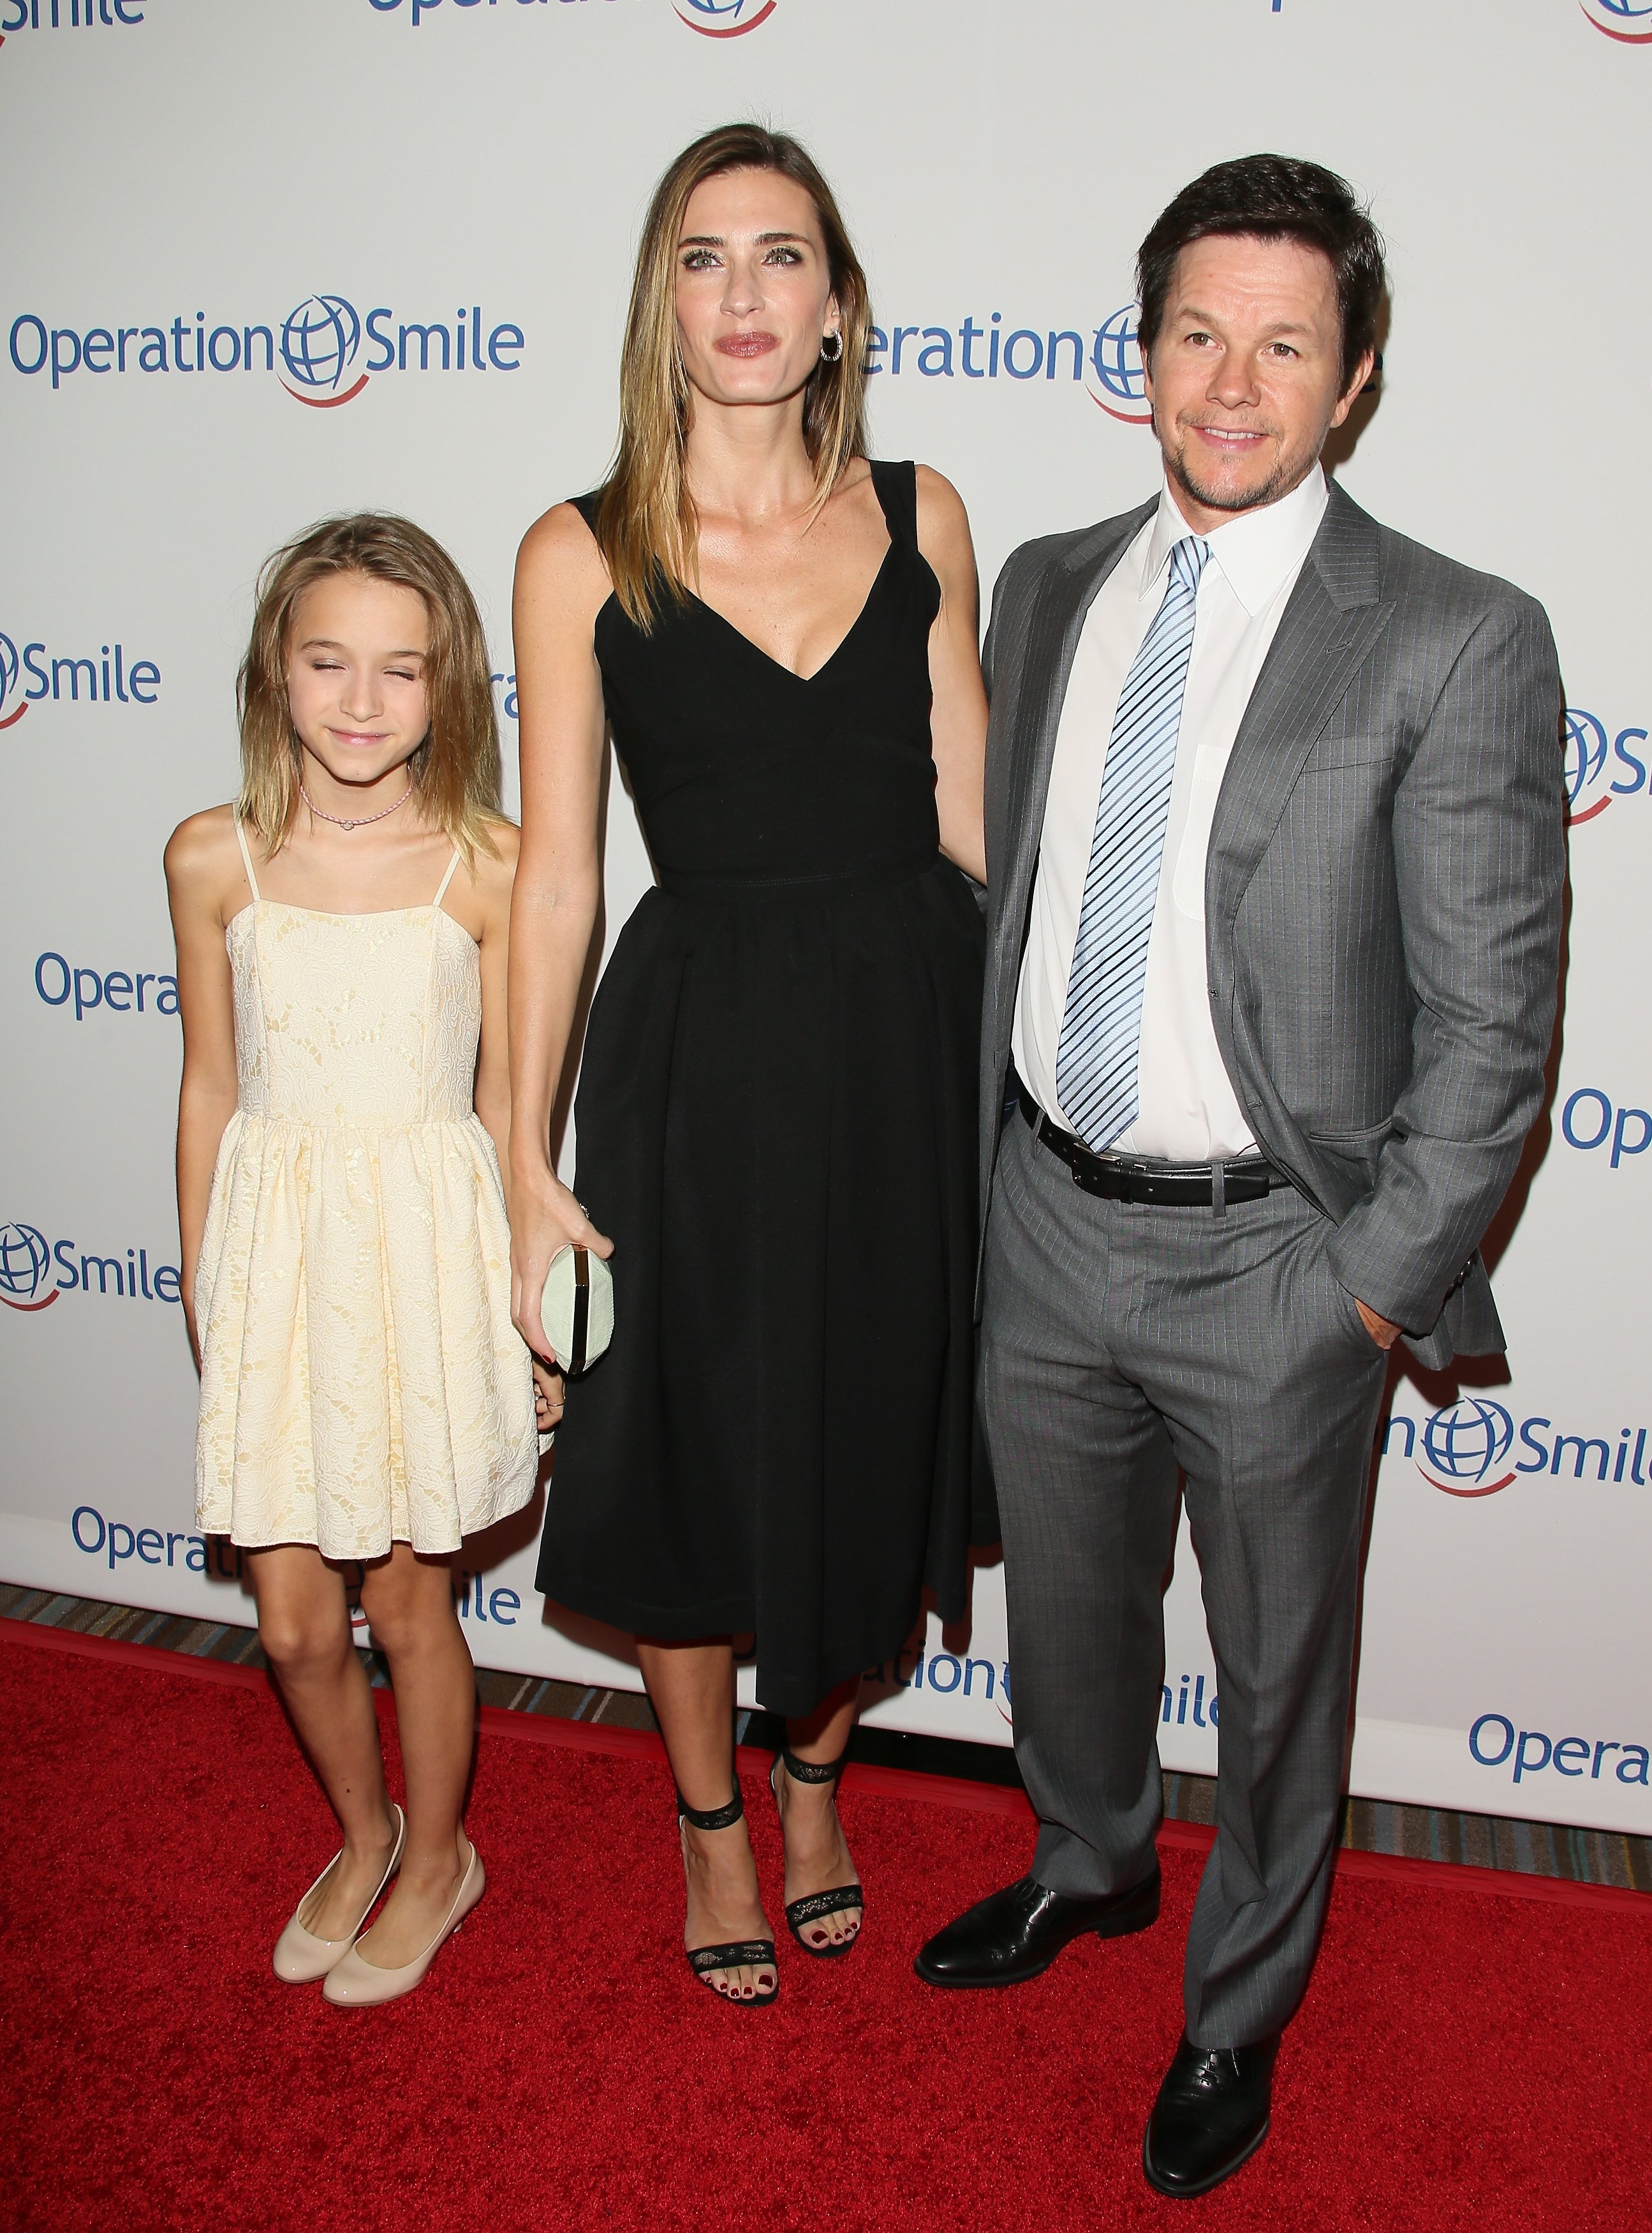 Ella Rae Wahlberg, Rhea Durham; Mark Wahlberg attend Operation Smile's 2015 Smile Gala event held at The Beverly Wilshire Four Seasons Hotel on October 2, 2015 in Beverly Hills, California. | Source: Getty Images